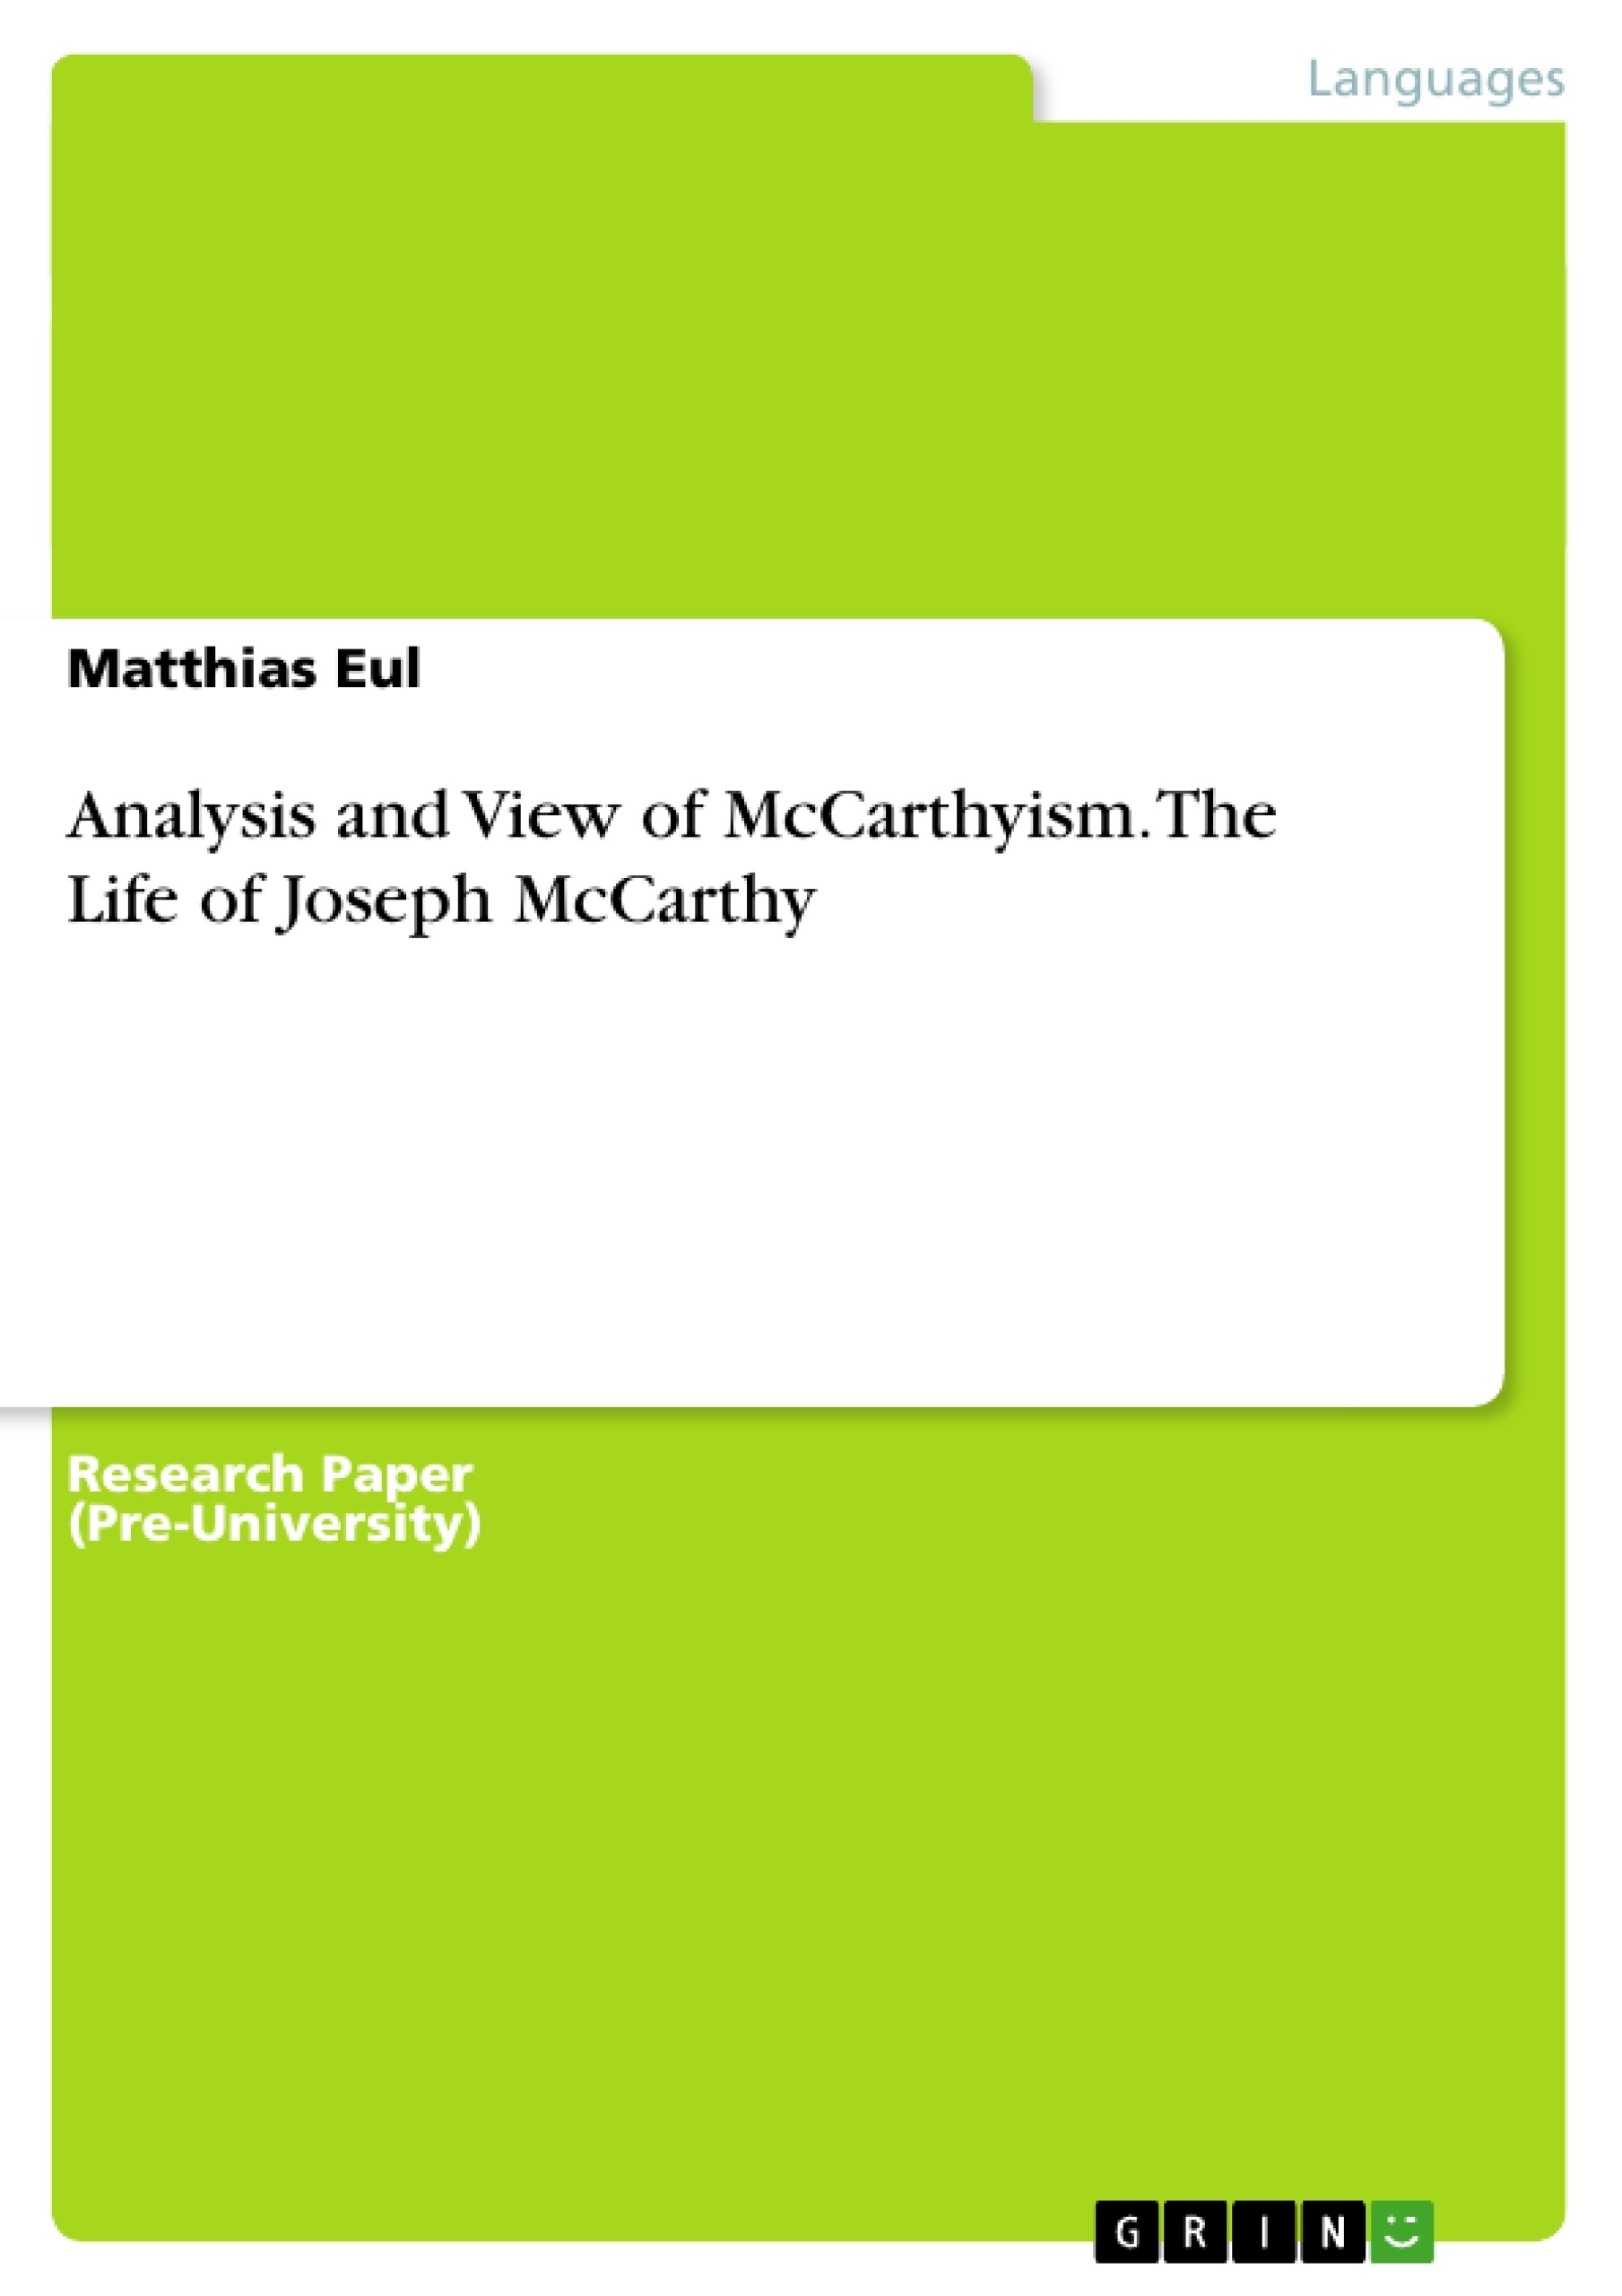 Titel: Analysis and View of McCarthyism. The Life of Joseph McCarthy